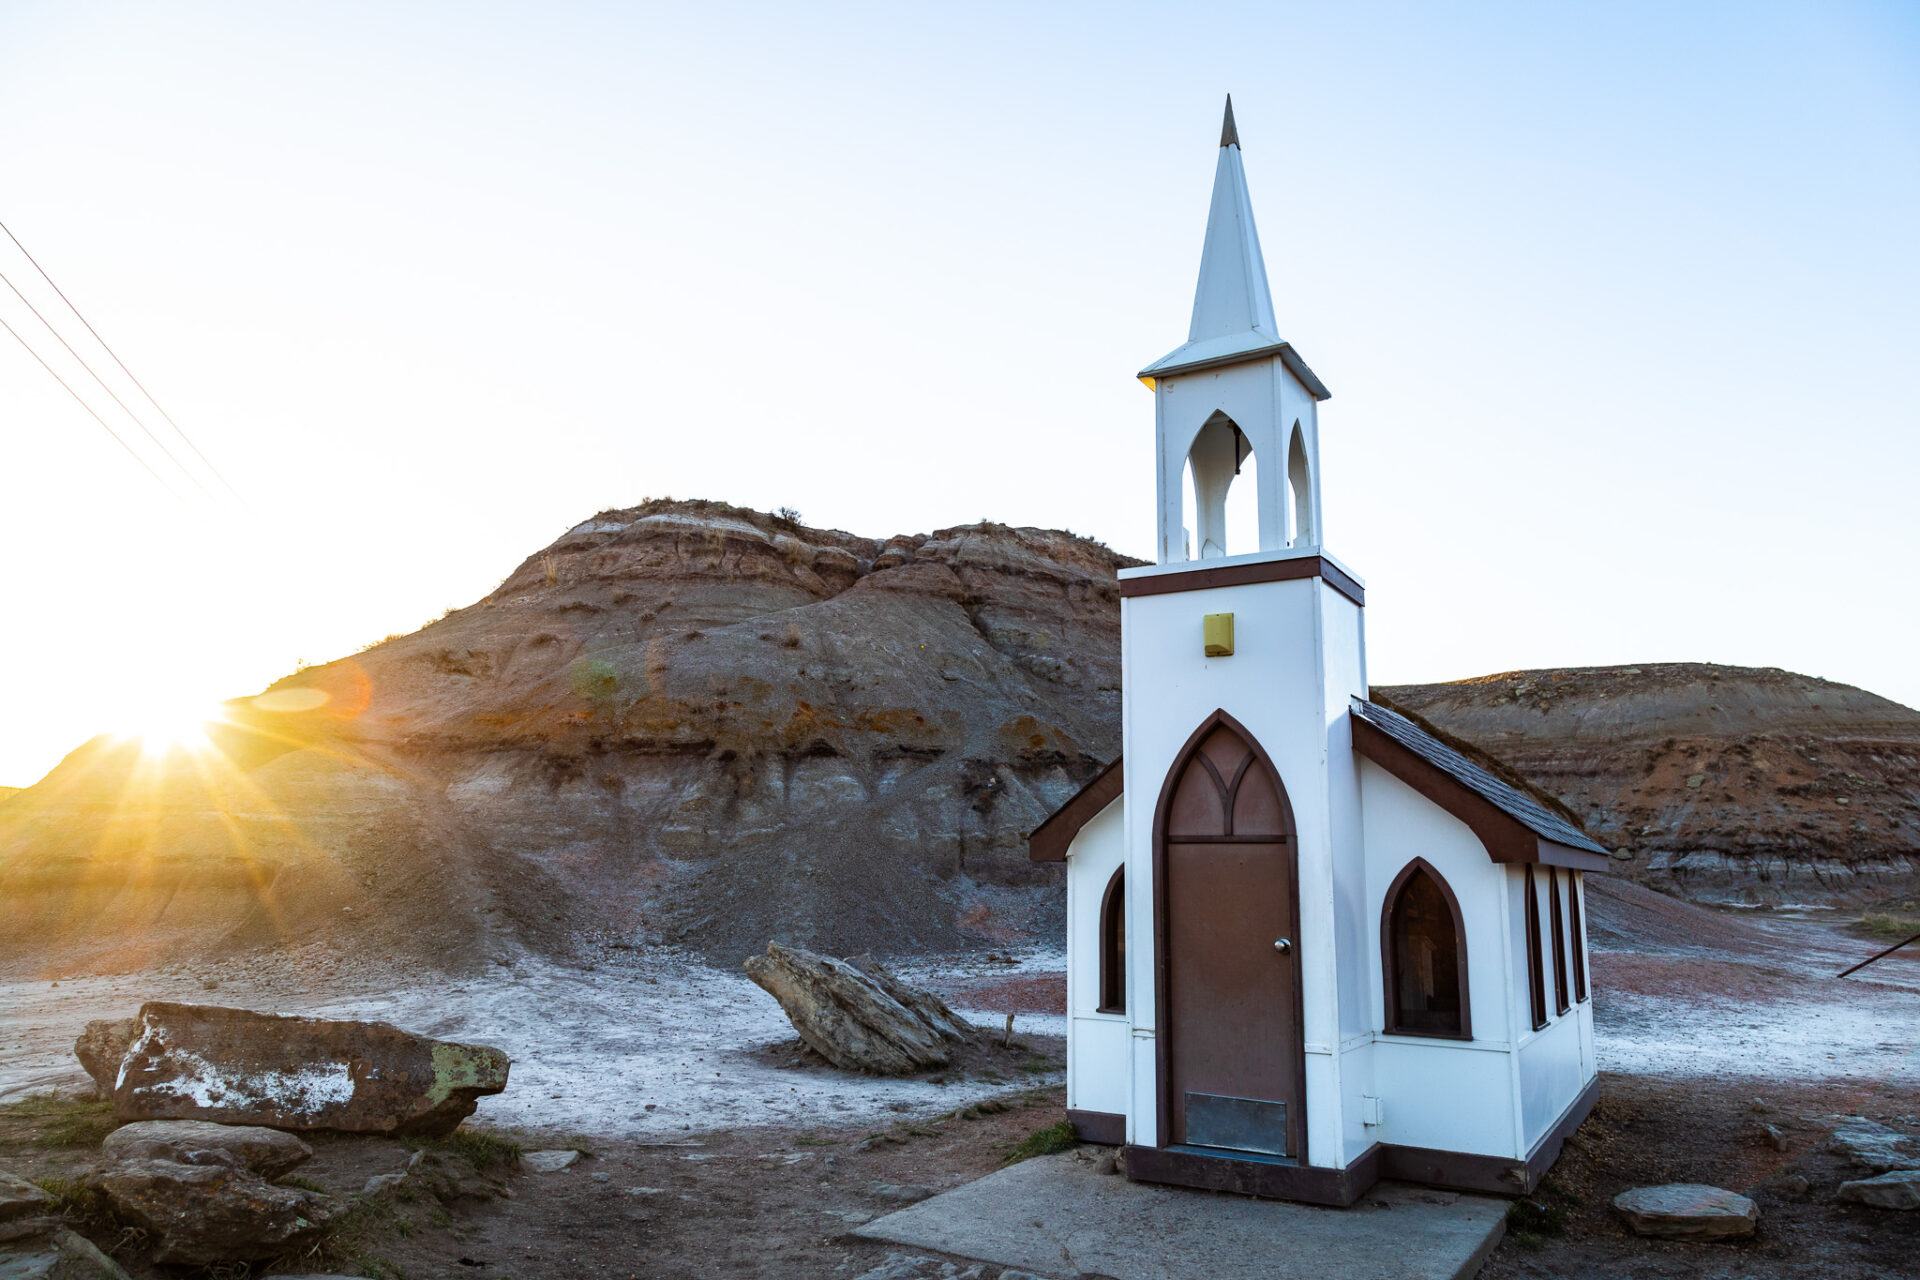 Drumheller little church - one of the best things to do in Drumheller 